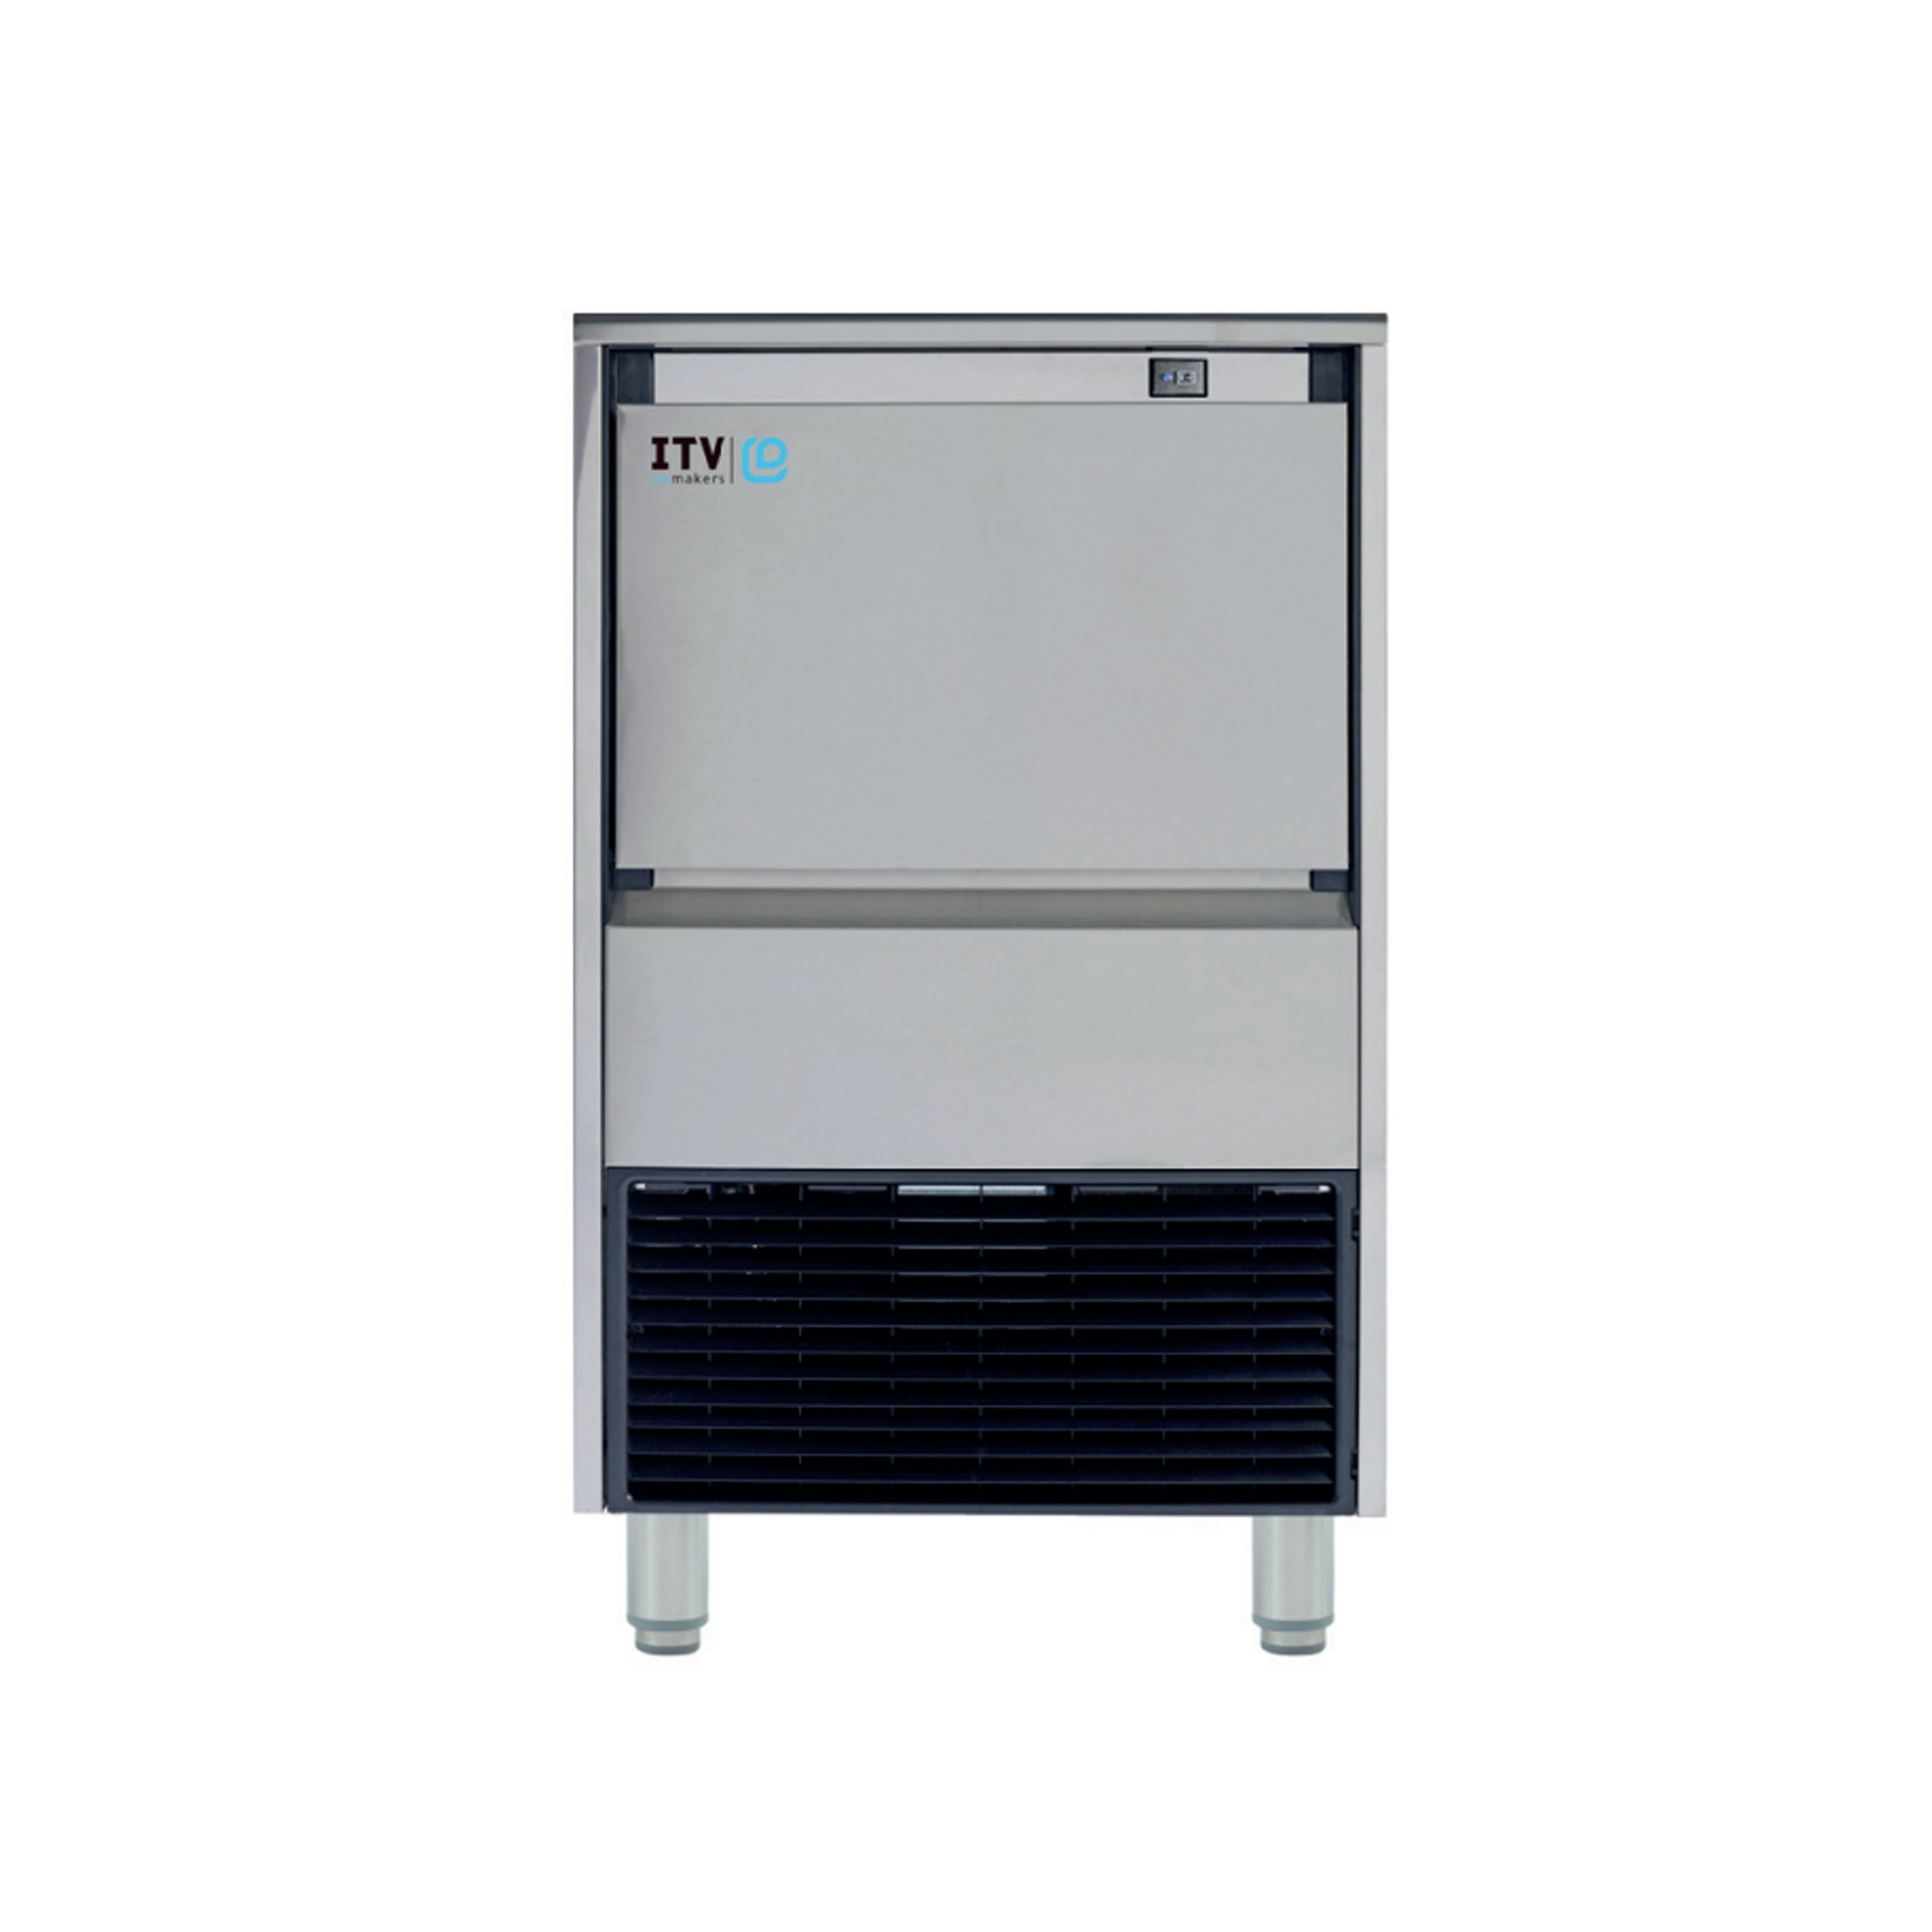 ITV - DELTA NG 150 R290 A, Commercial Delta Gourmet Cubers Ice Maker Self-Contained Ice Cube Machine 143lbs